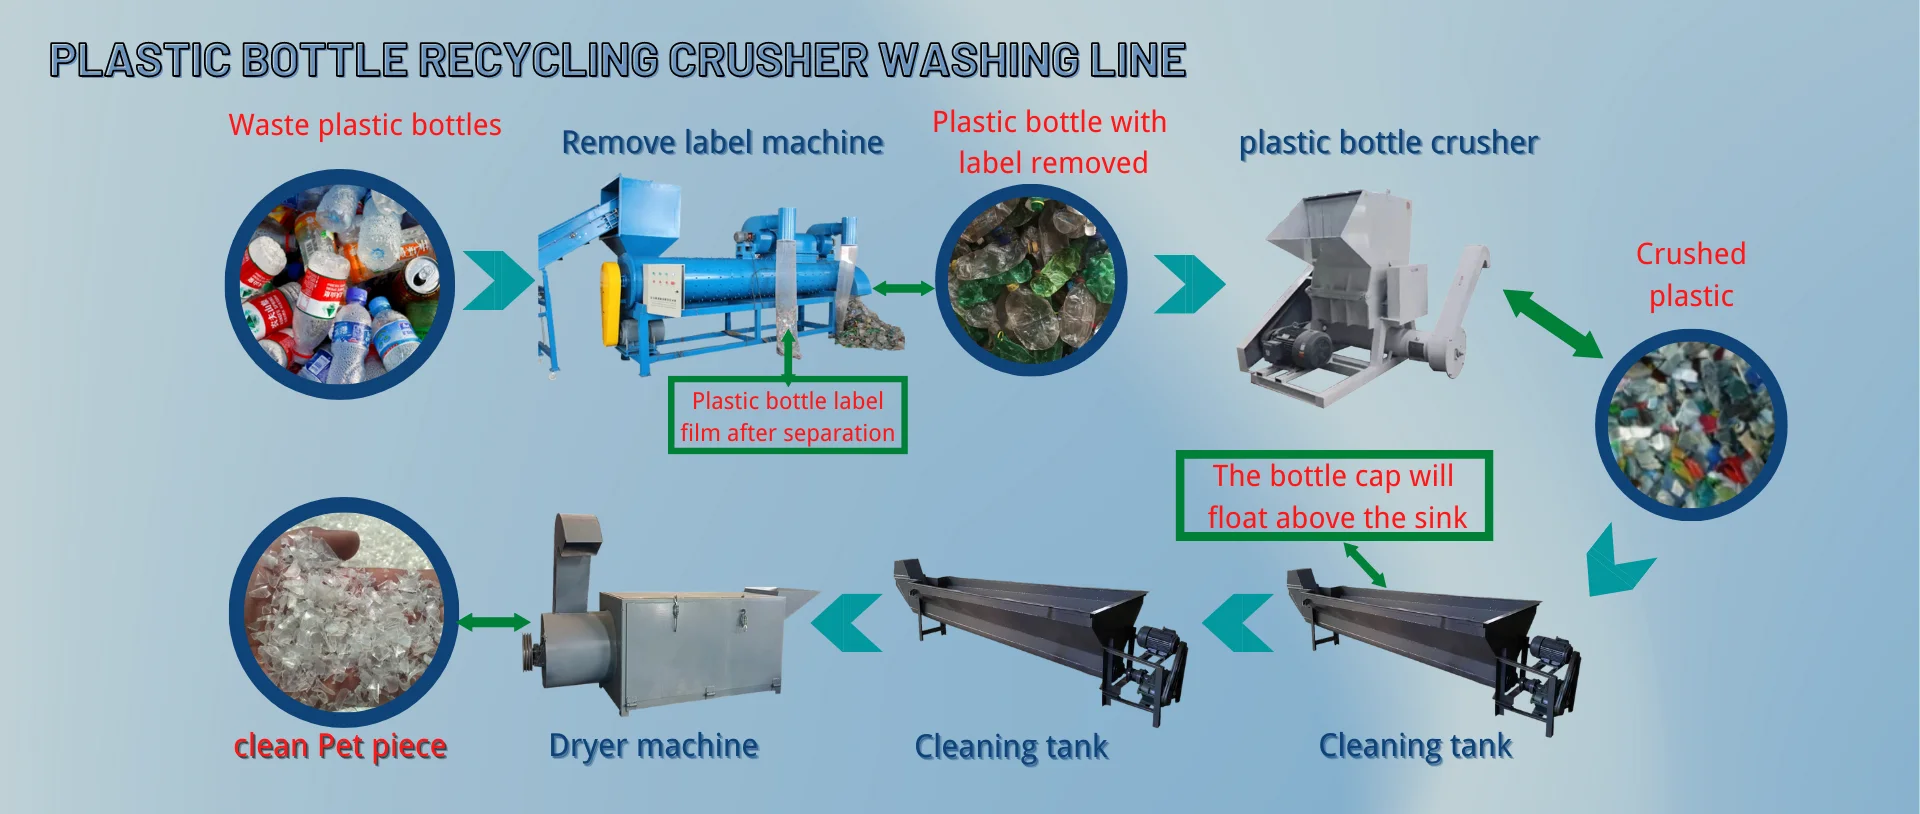 plastic recycling crusher wash line